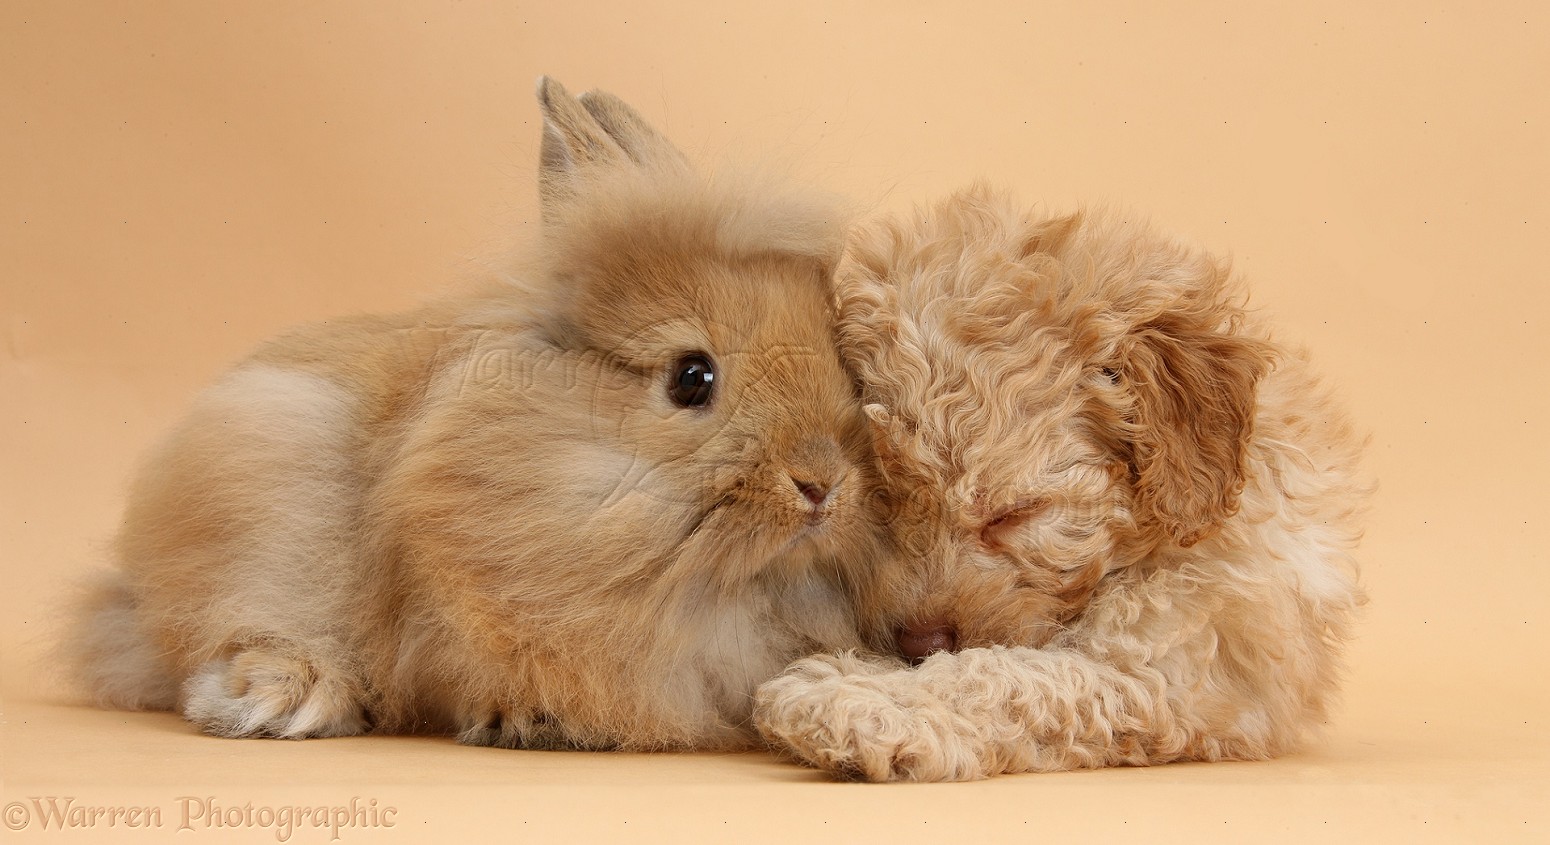 Pets: Sleepy Toy Labradoodle puppy and fluffy bunny photo WP36261